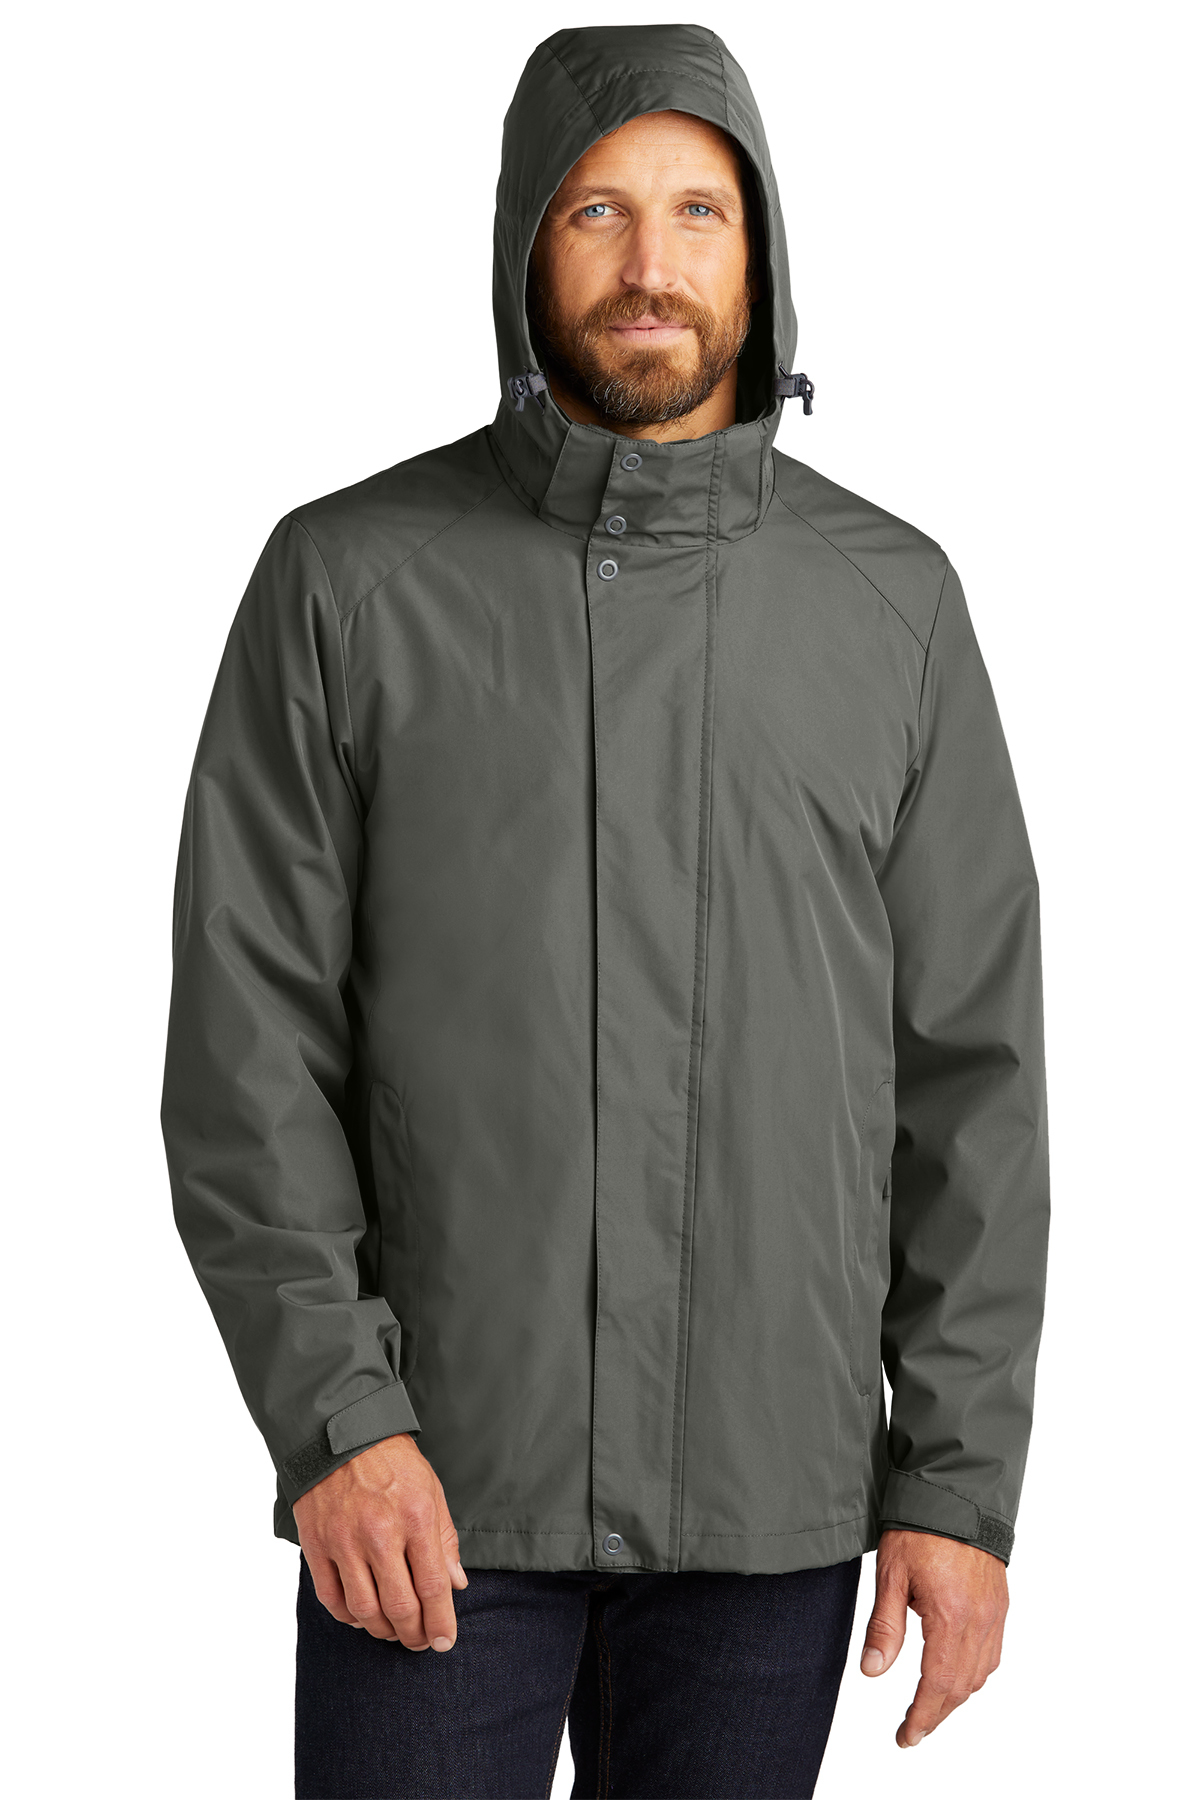 Port Authority All-Weather 3-in-1 Jacket | Product | Company Casuals